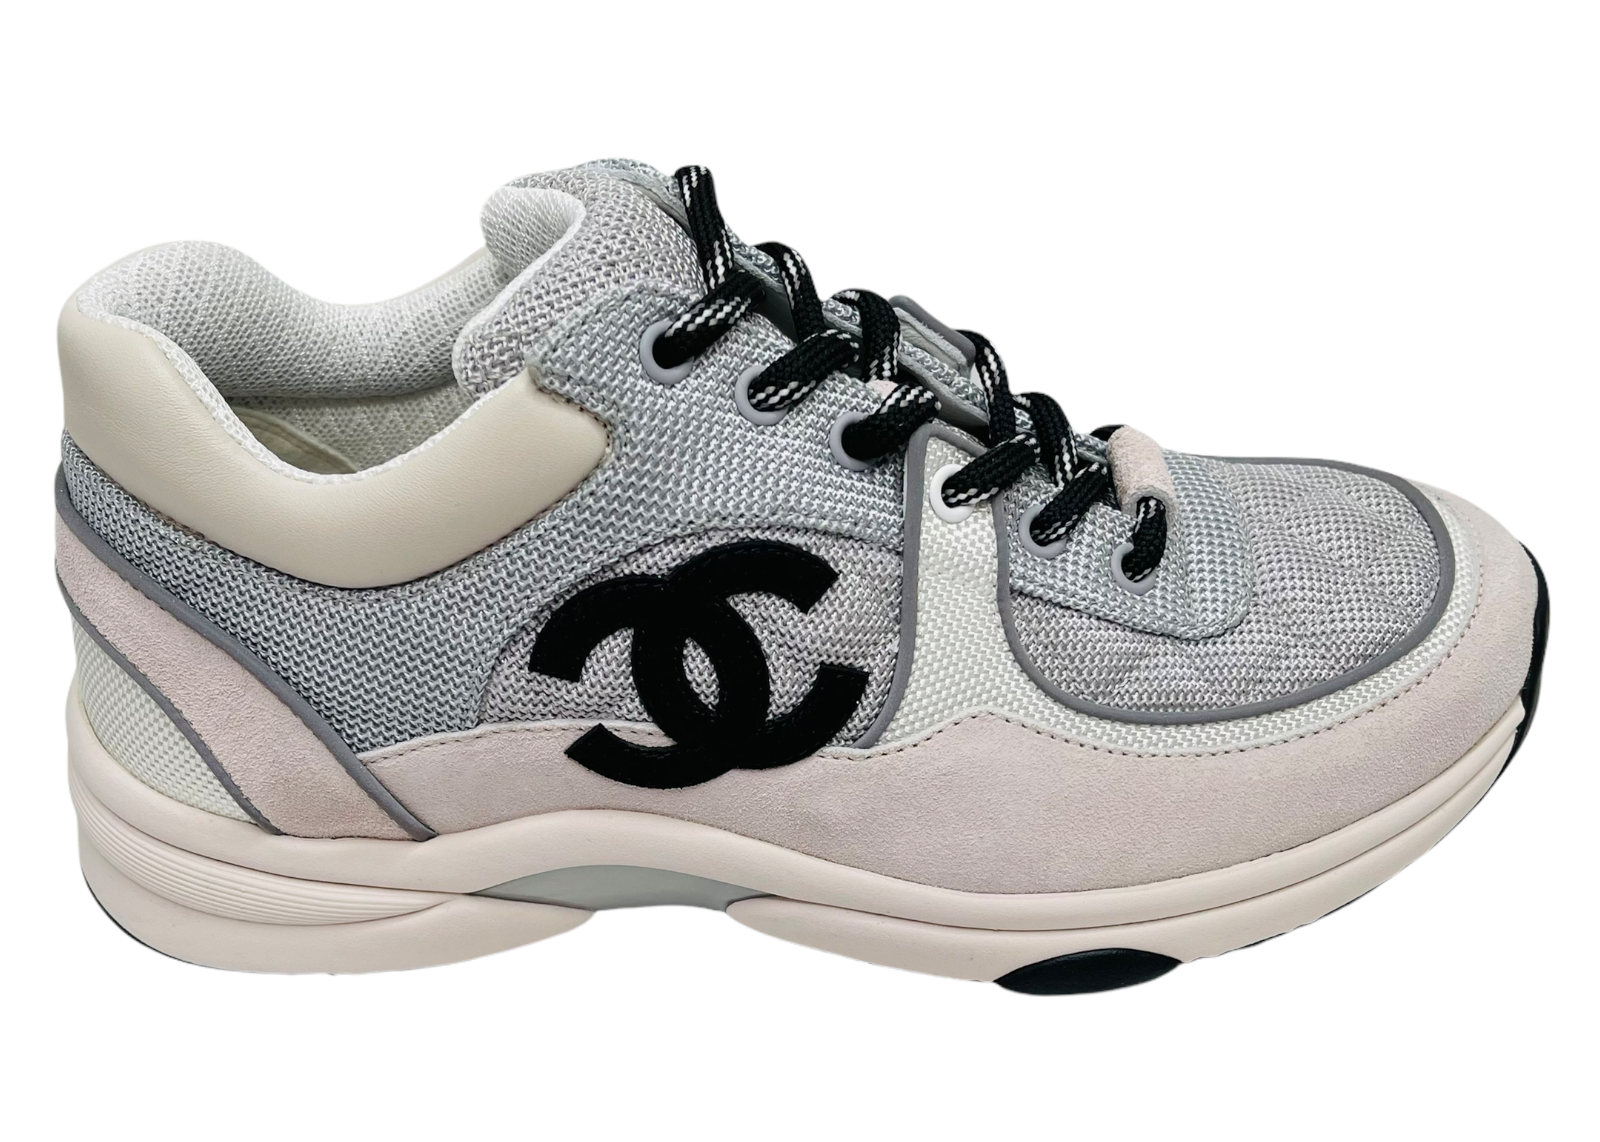 Chanel Low Top Trainer Gray White sneakers